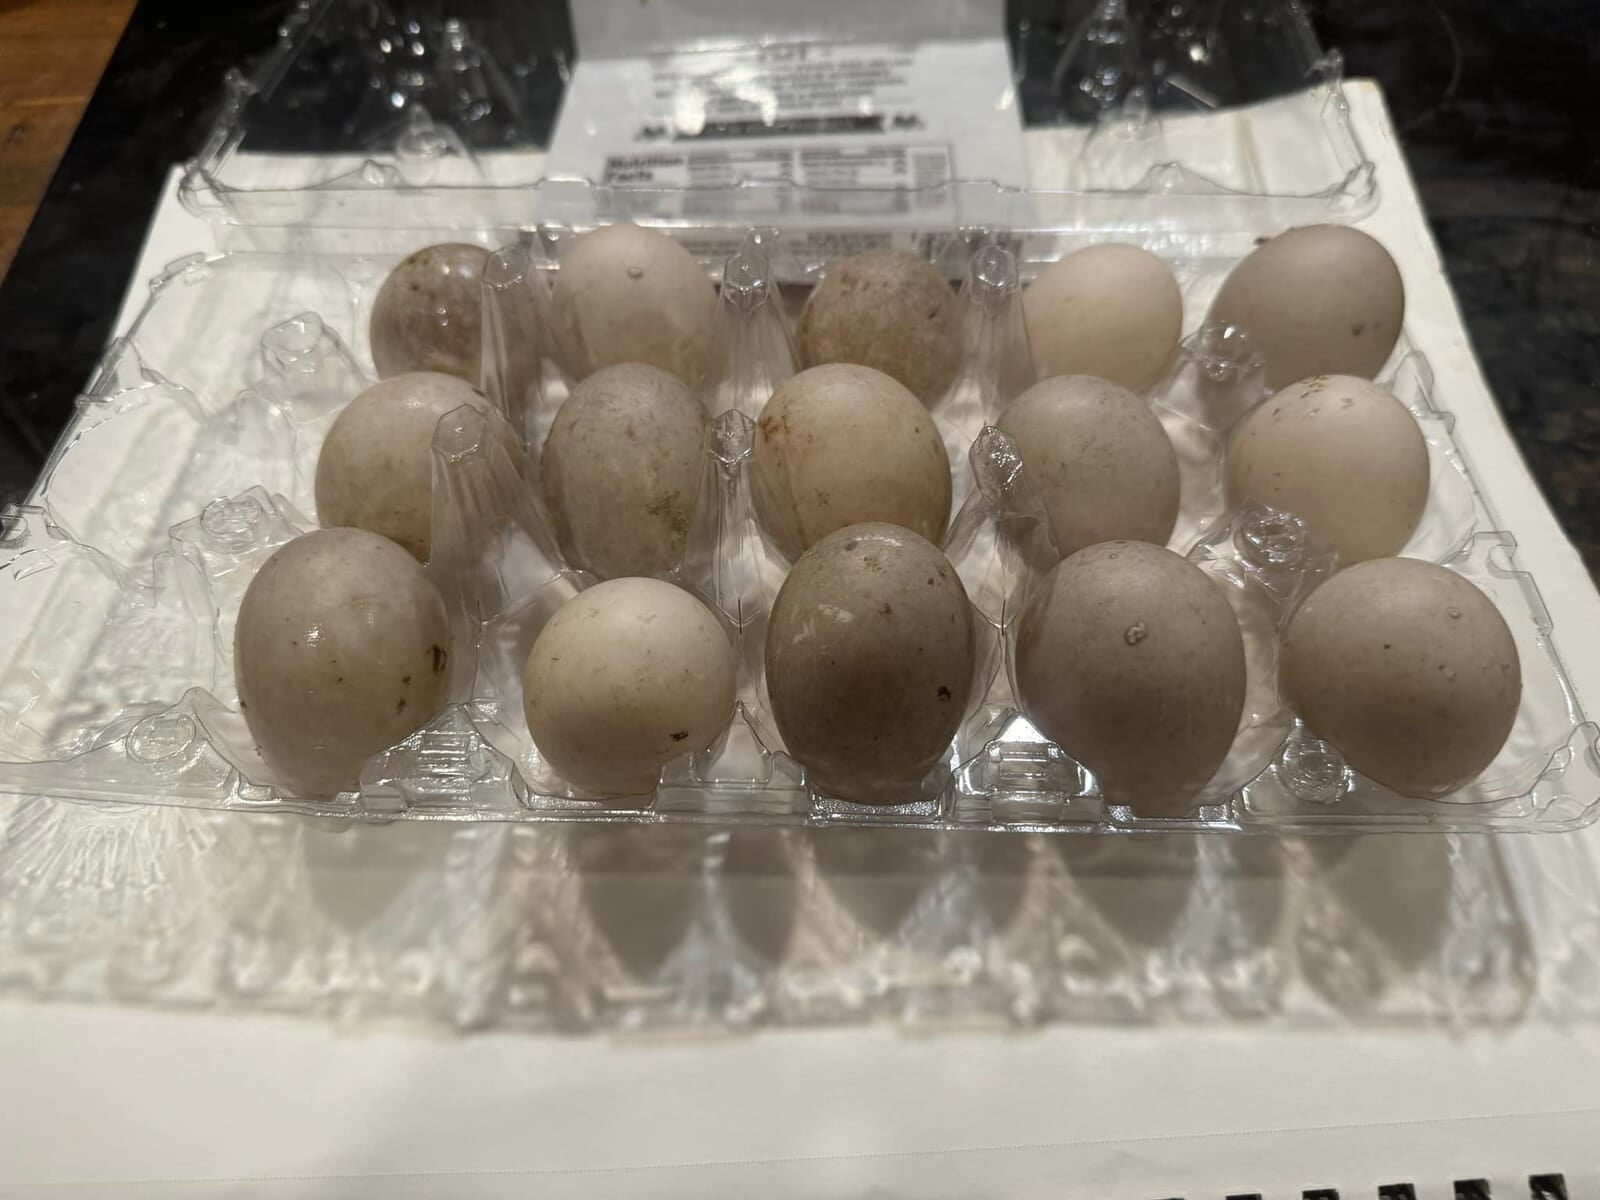 Gray eggs with moderate bloom from Black East Indies ducks, sitting in clear egg carton on a white sheet of paper for contrast